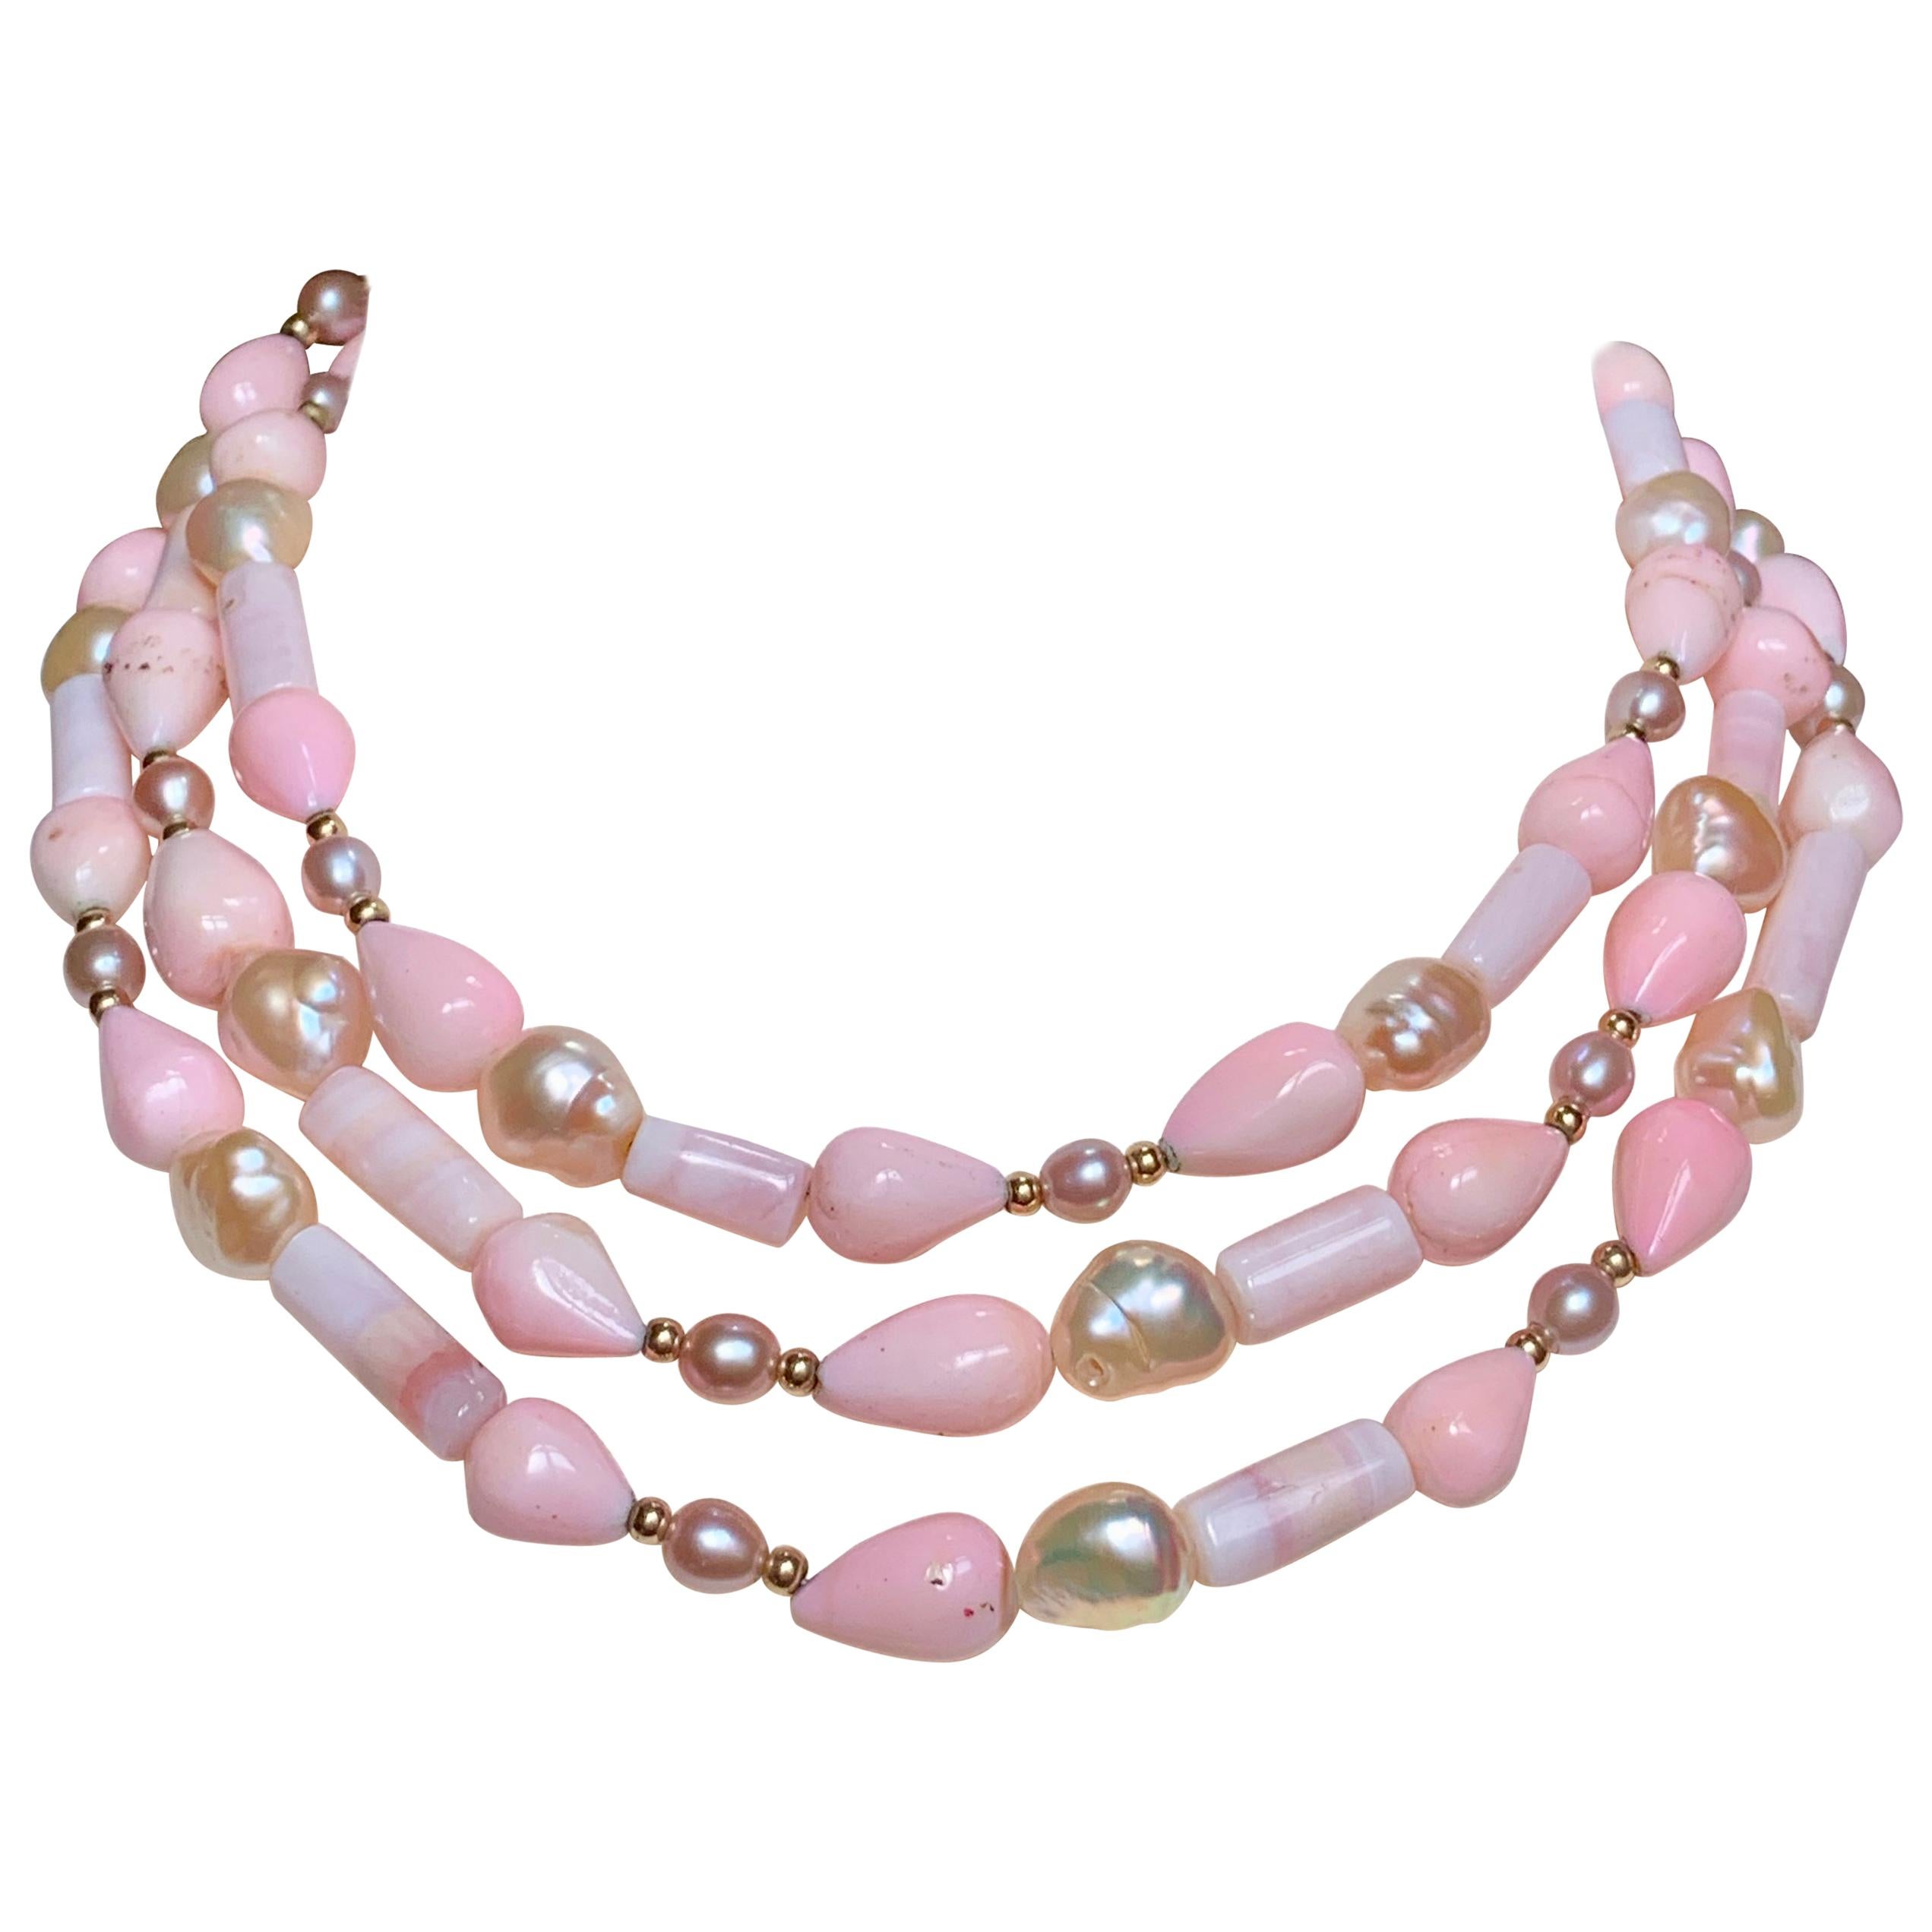 53" Long Peruvian Pink Opal Necklace with 14 Karat Gold Details For Sale